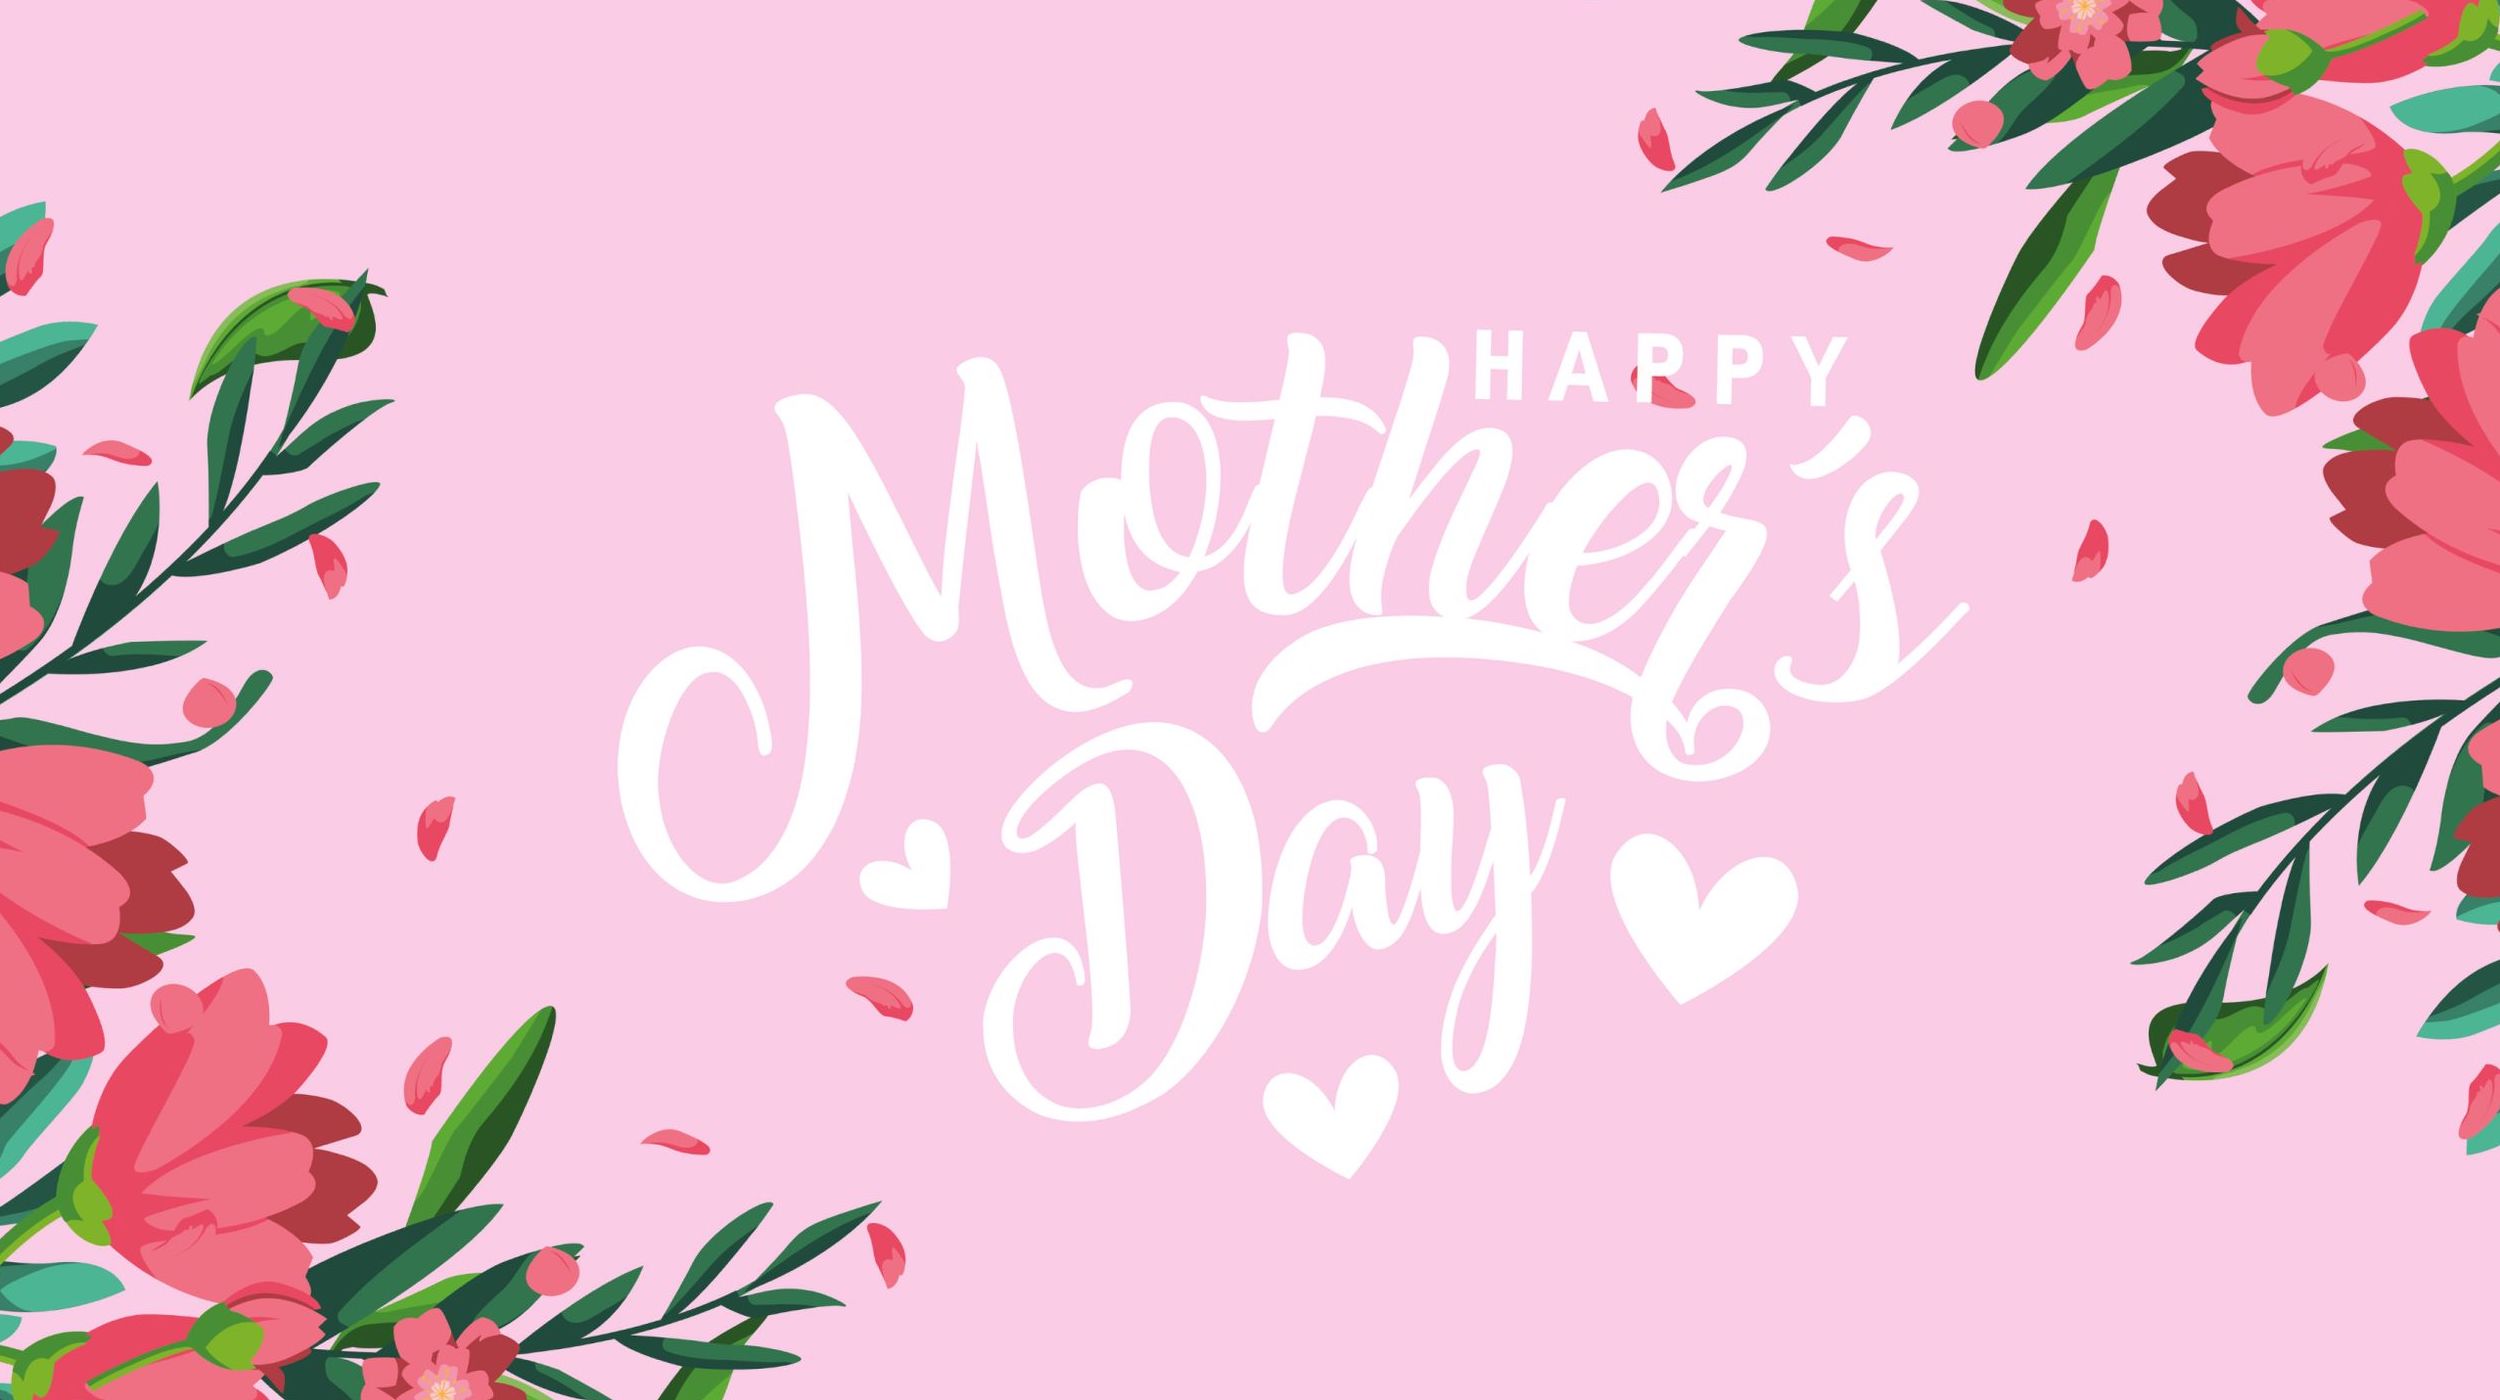 99+ ‘Happy Mother’s Day’ Messages, Greetings, and Quotes for 2023